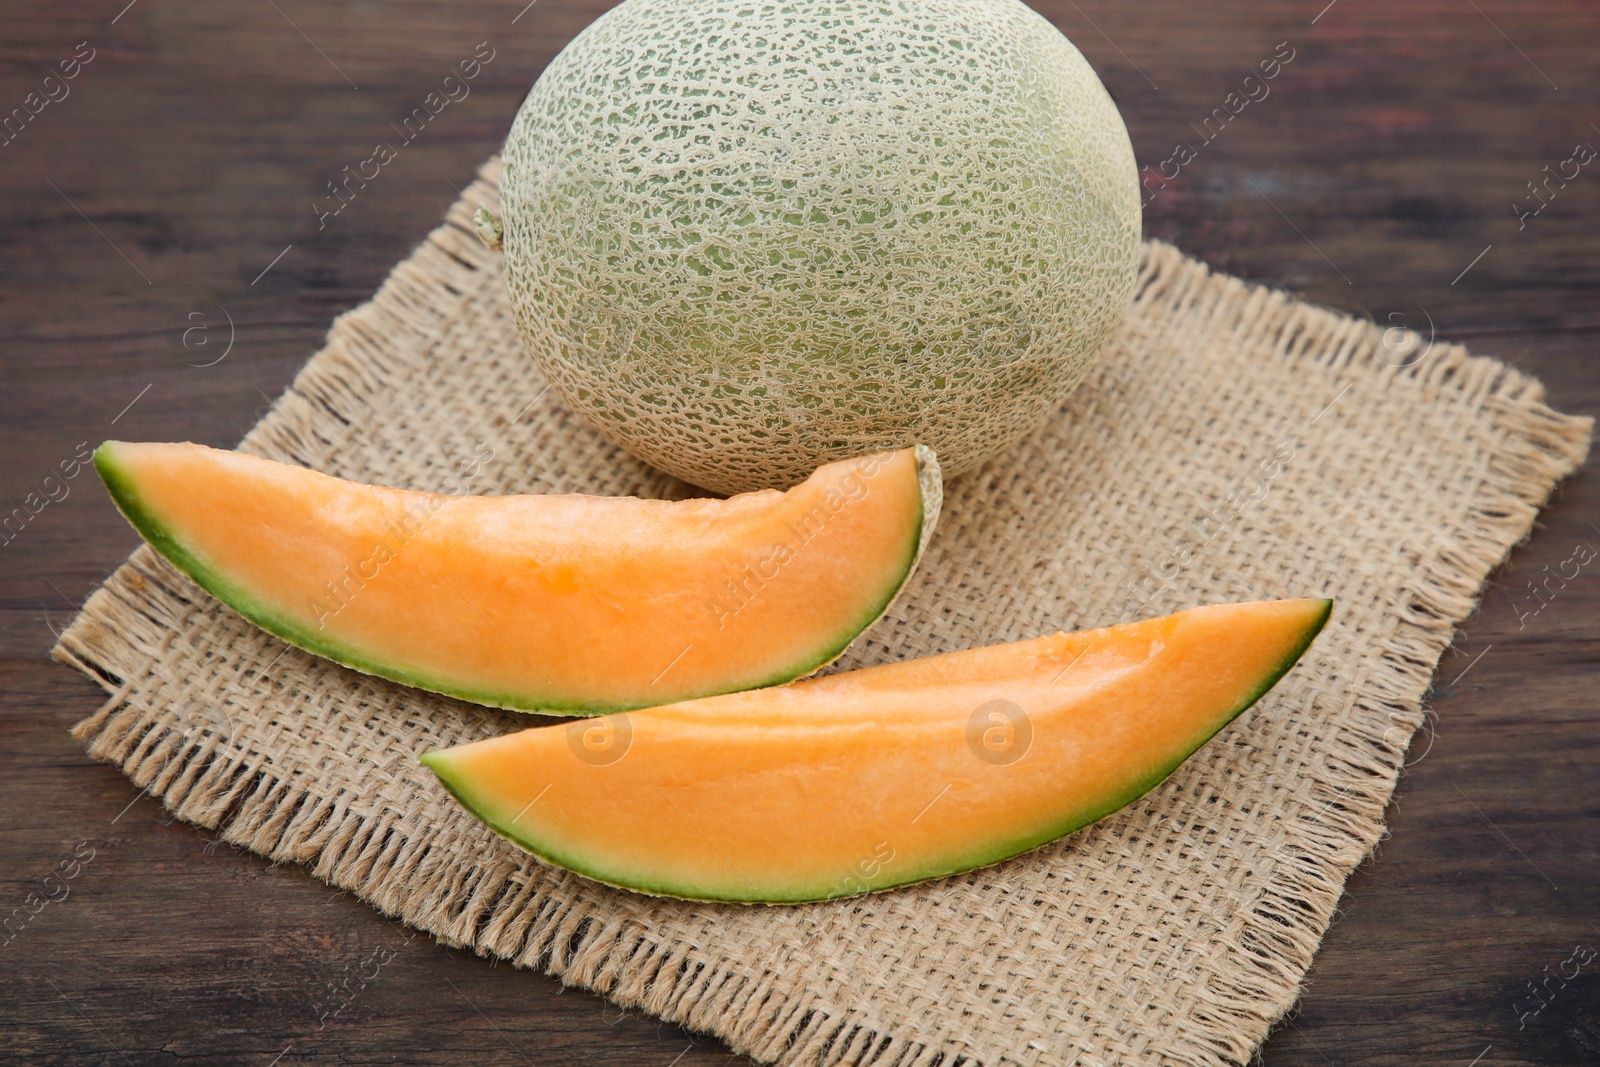 Photo of Cut and whole delicious ripe melons on wooden table